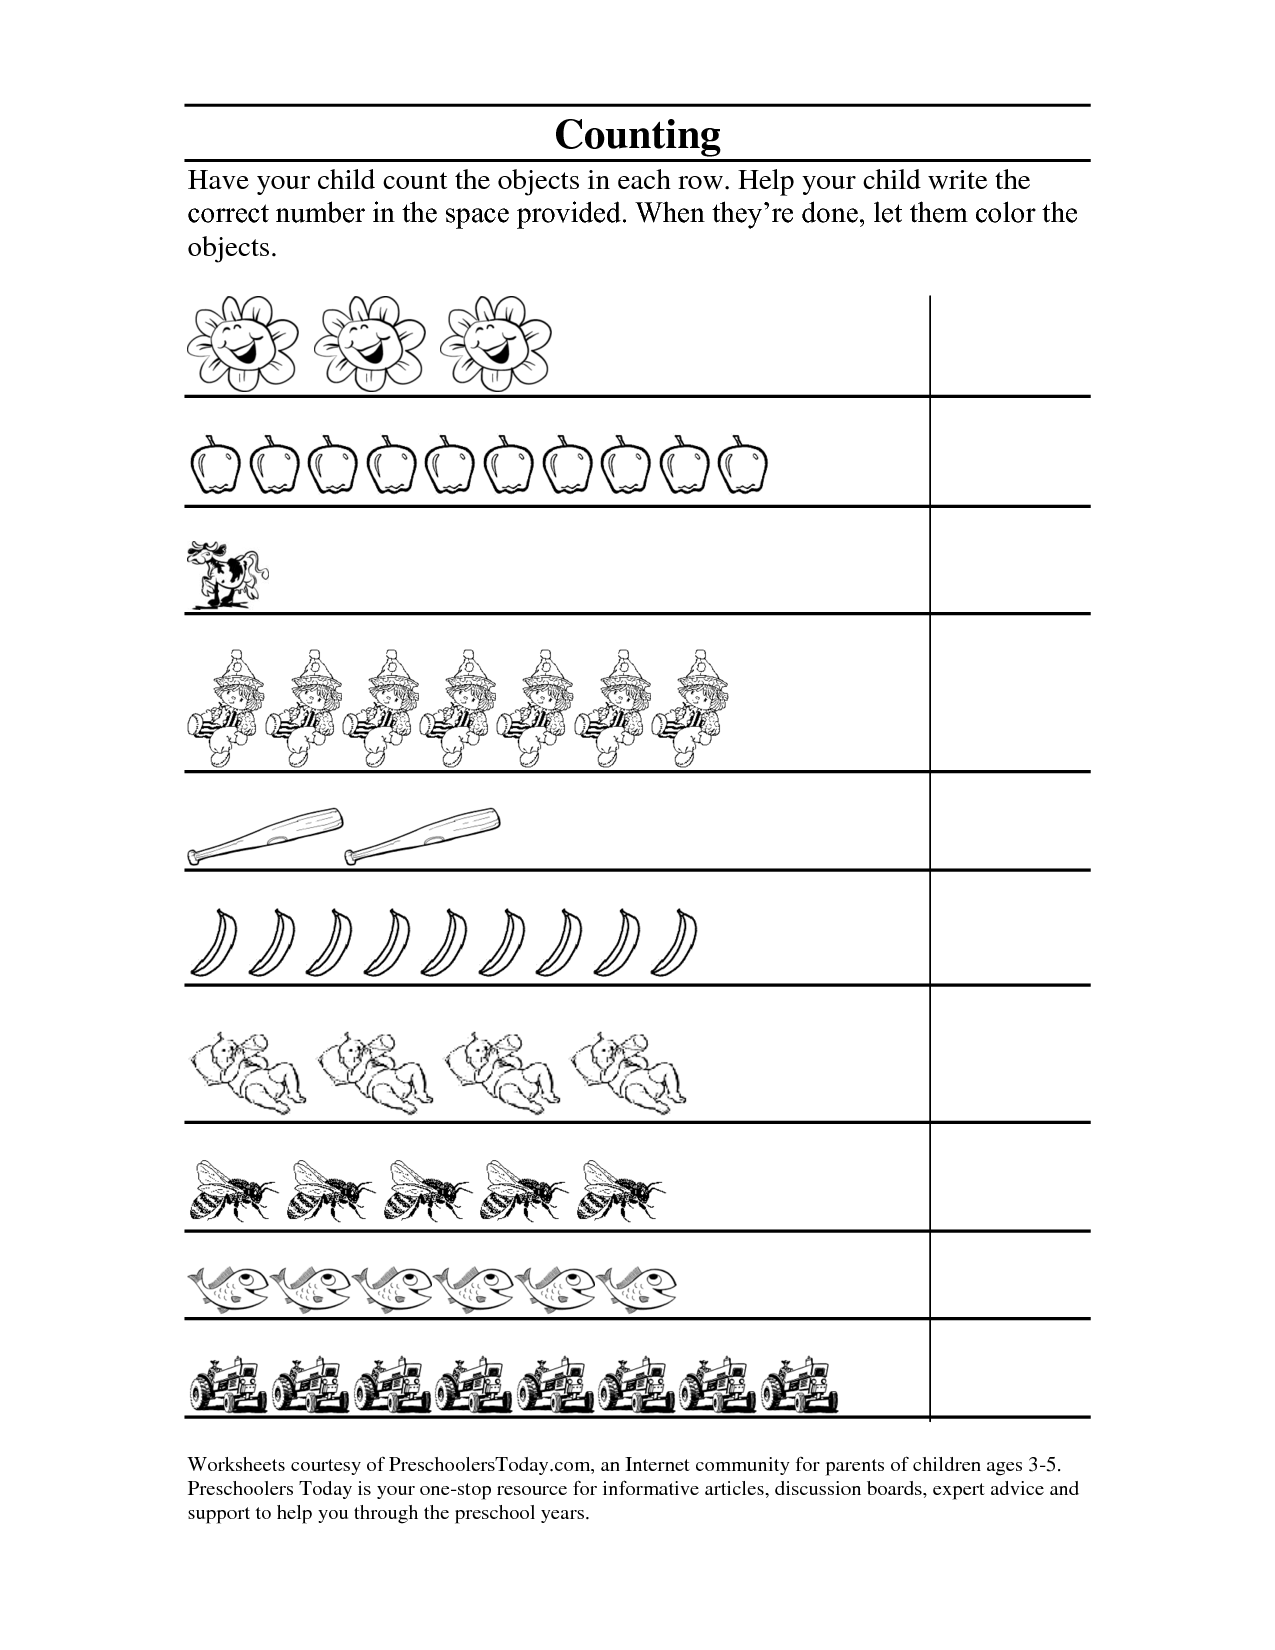 Count Objects and Write Number Worksheet Image